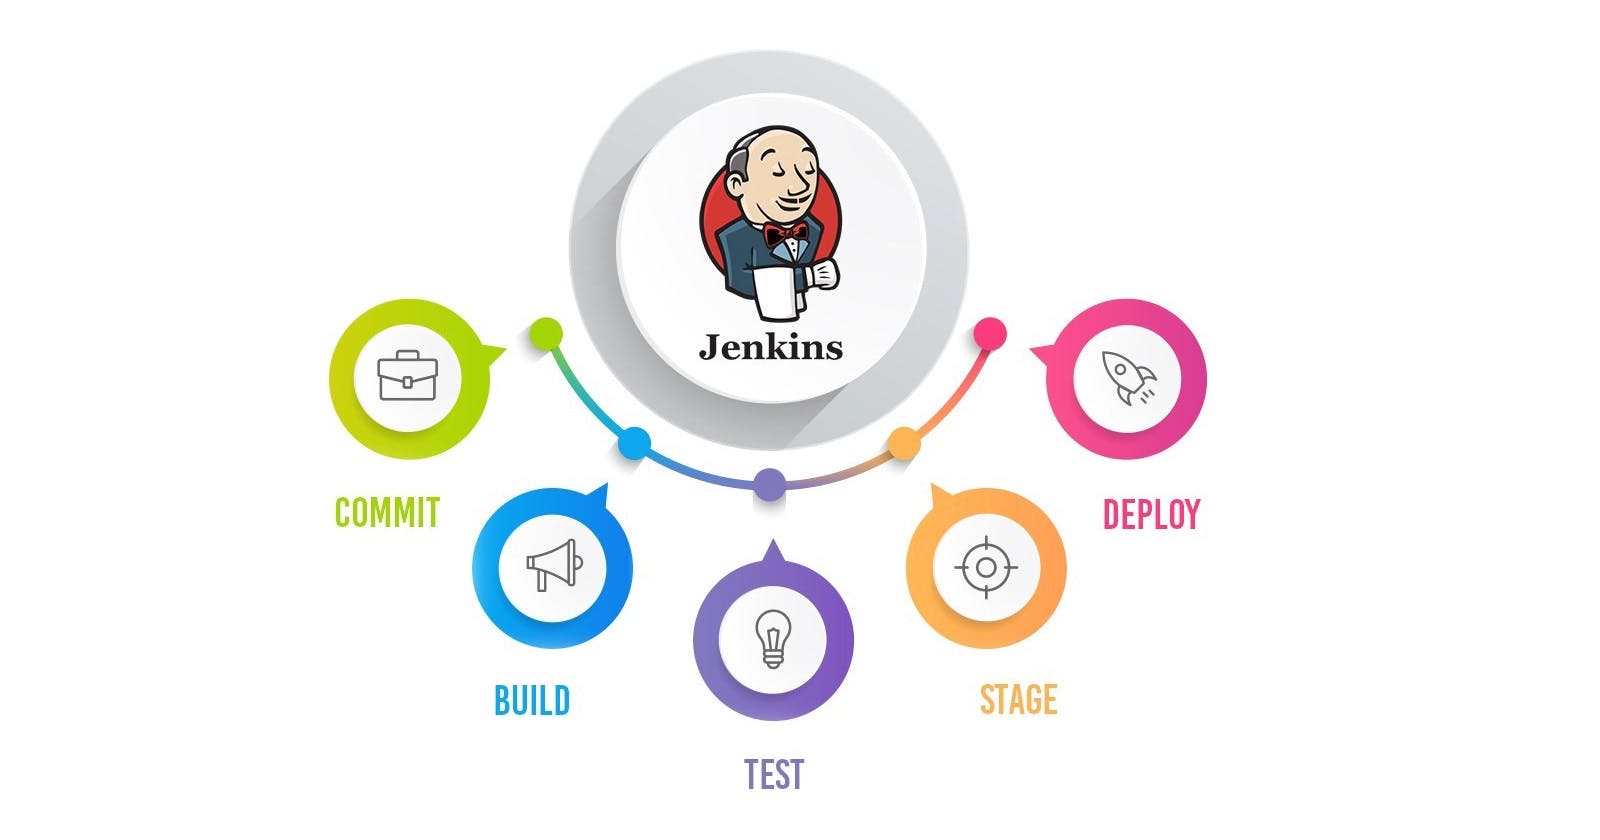 What is Jenkins really?